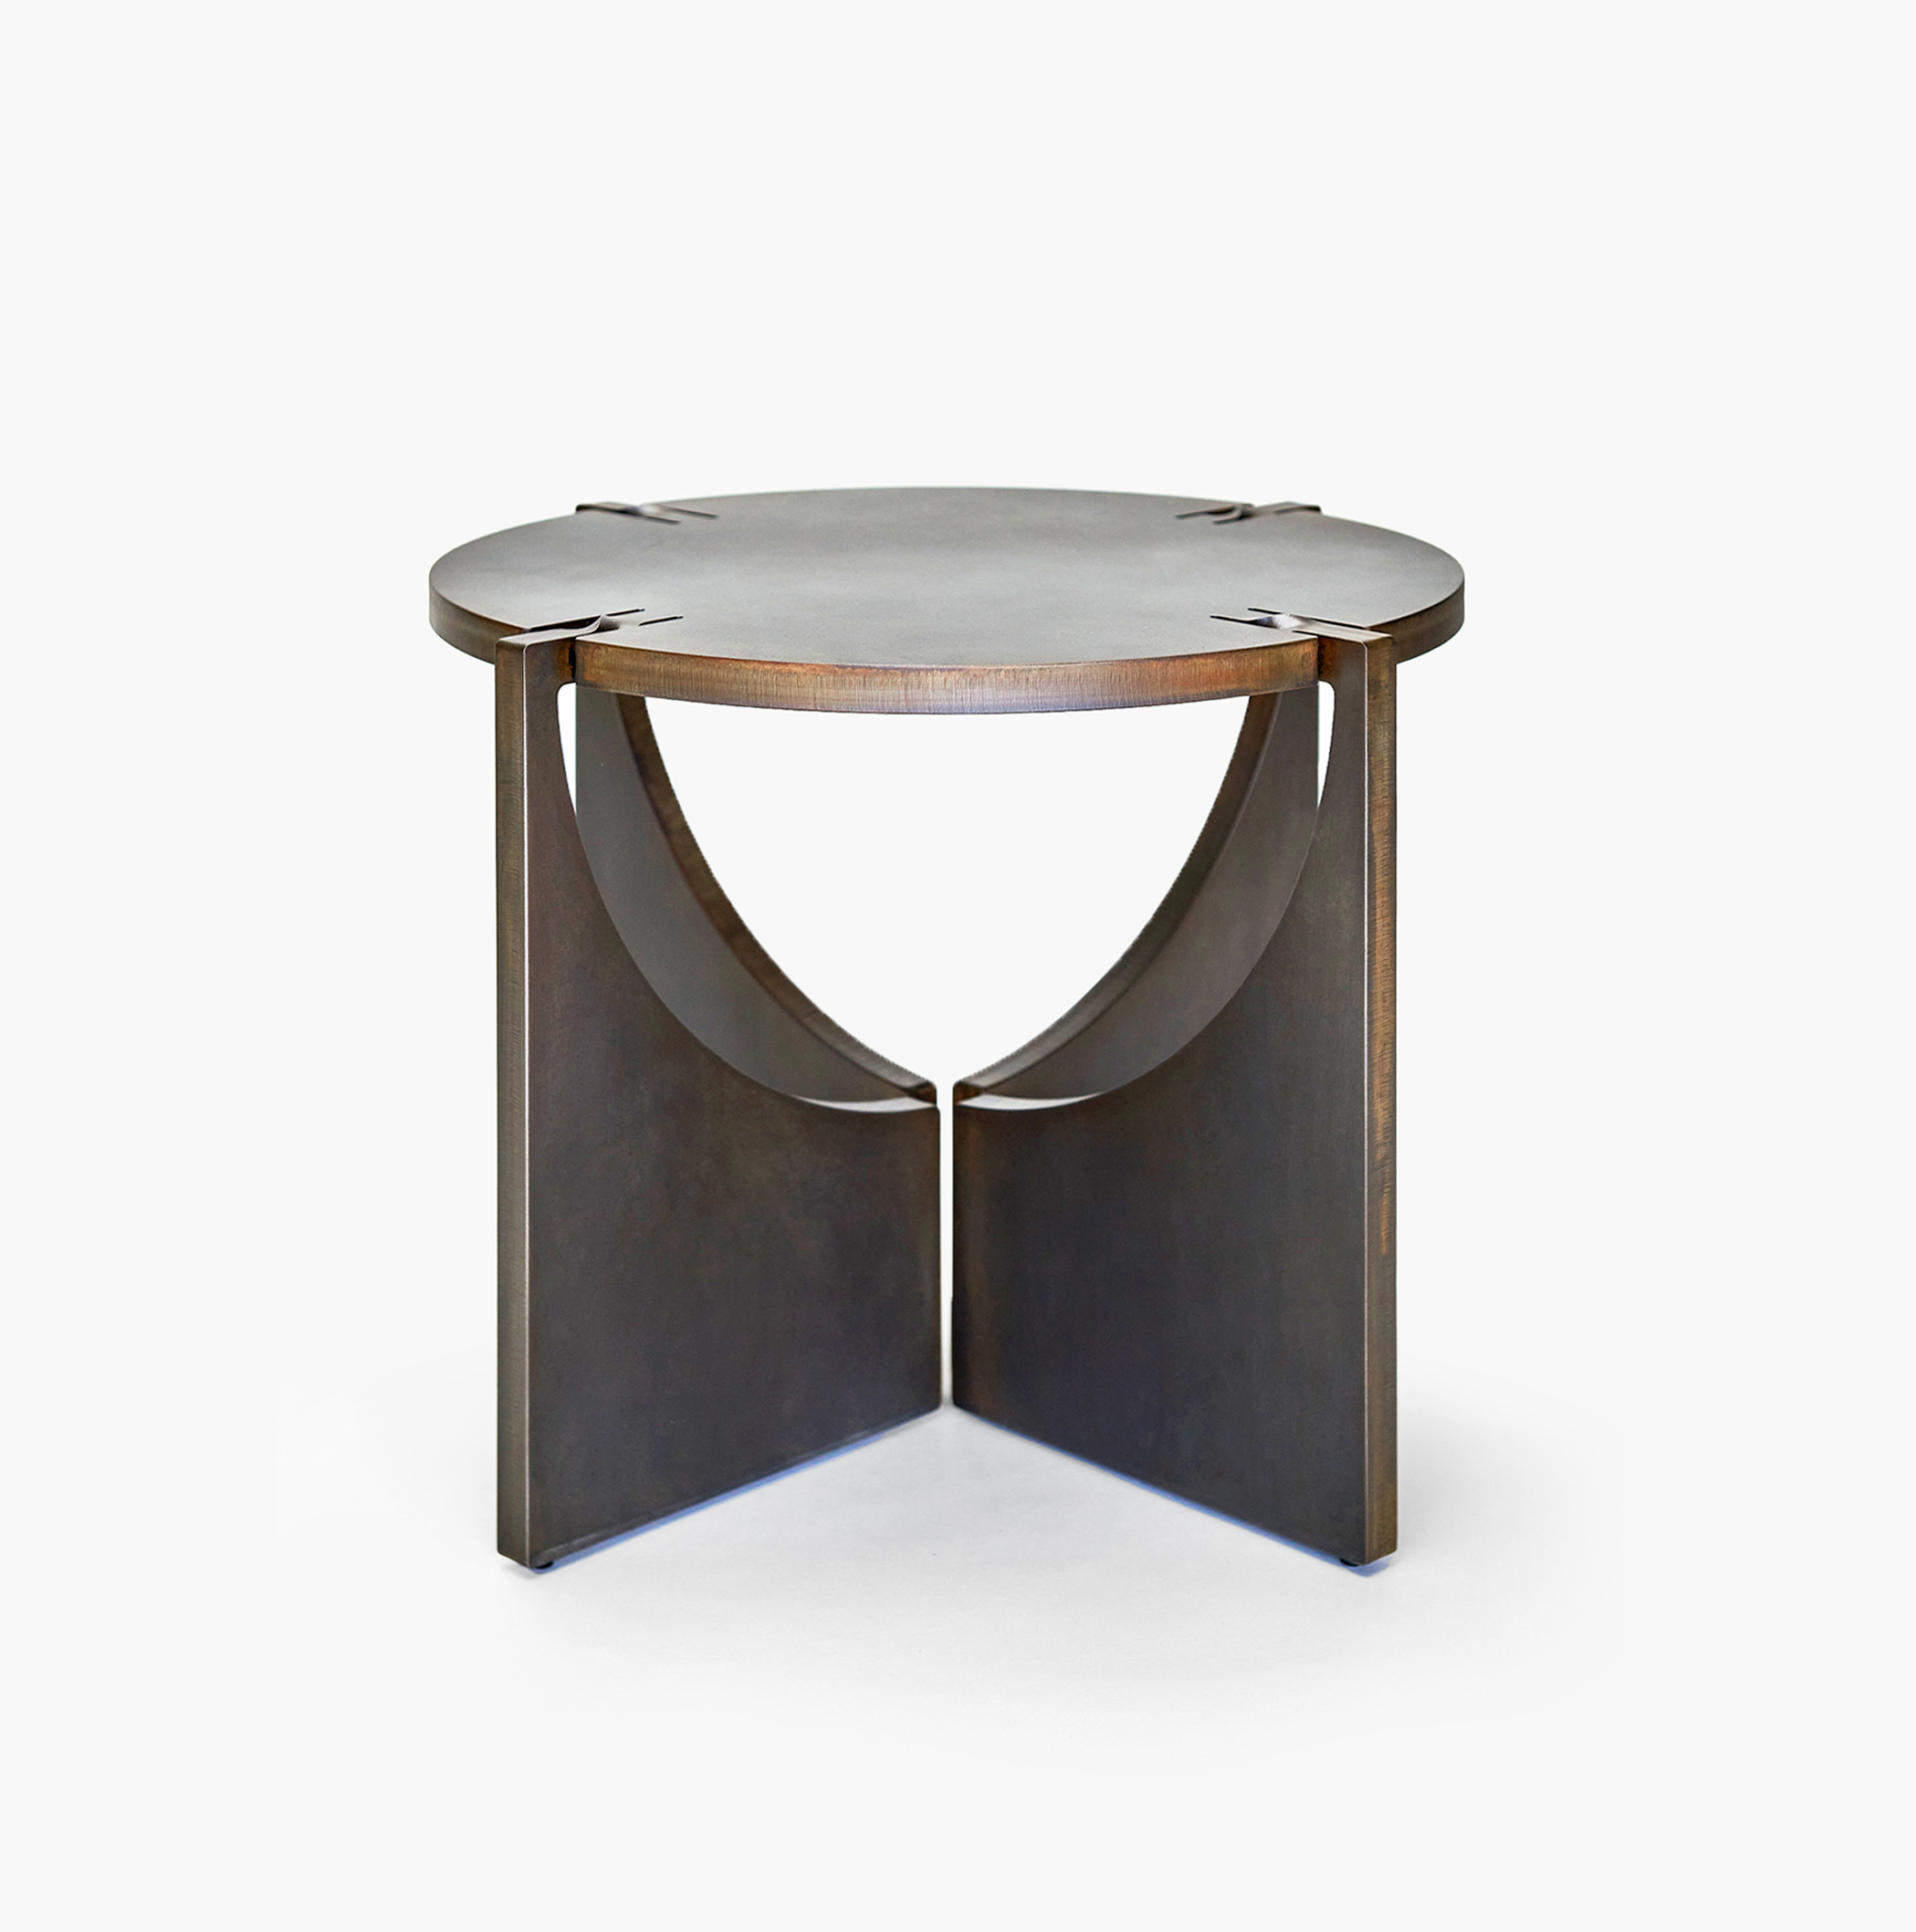 ONE Round Steel Table with Black Oxide patina by Frank Penders